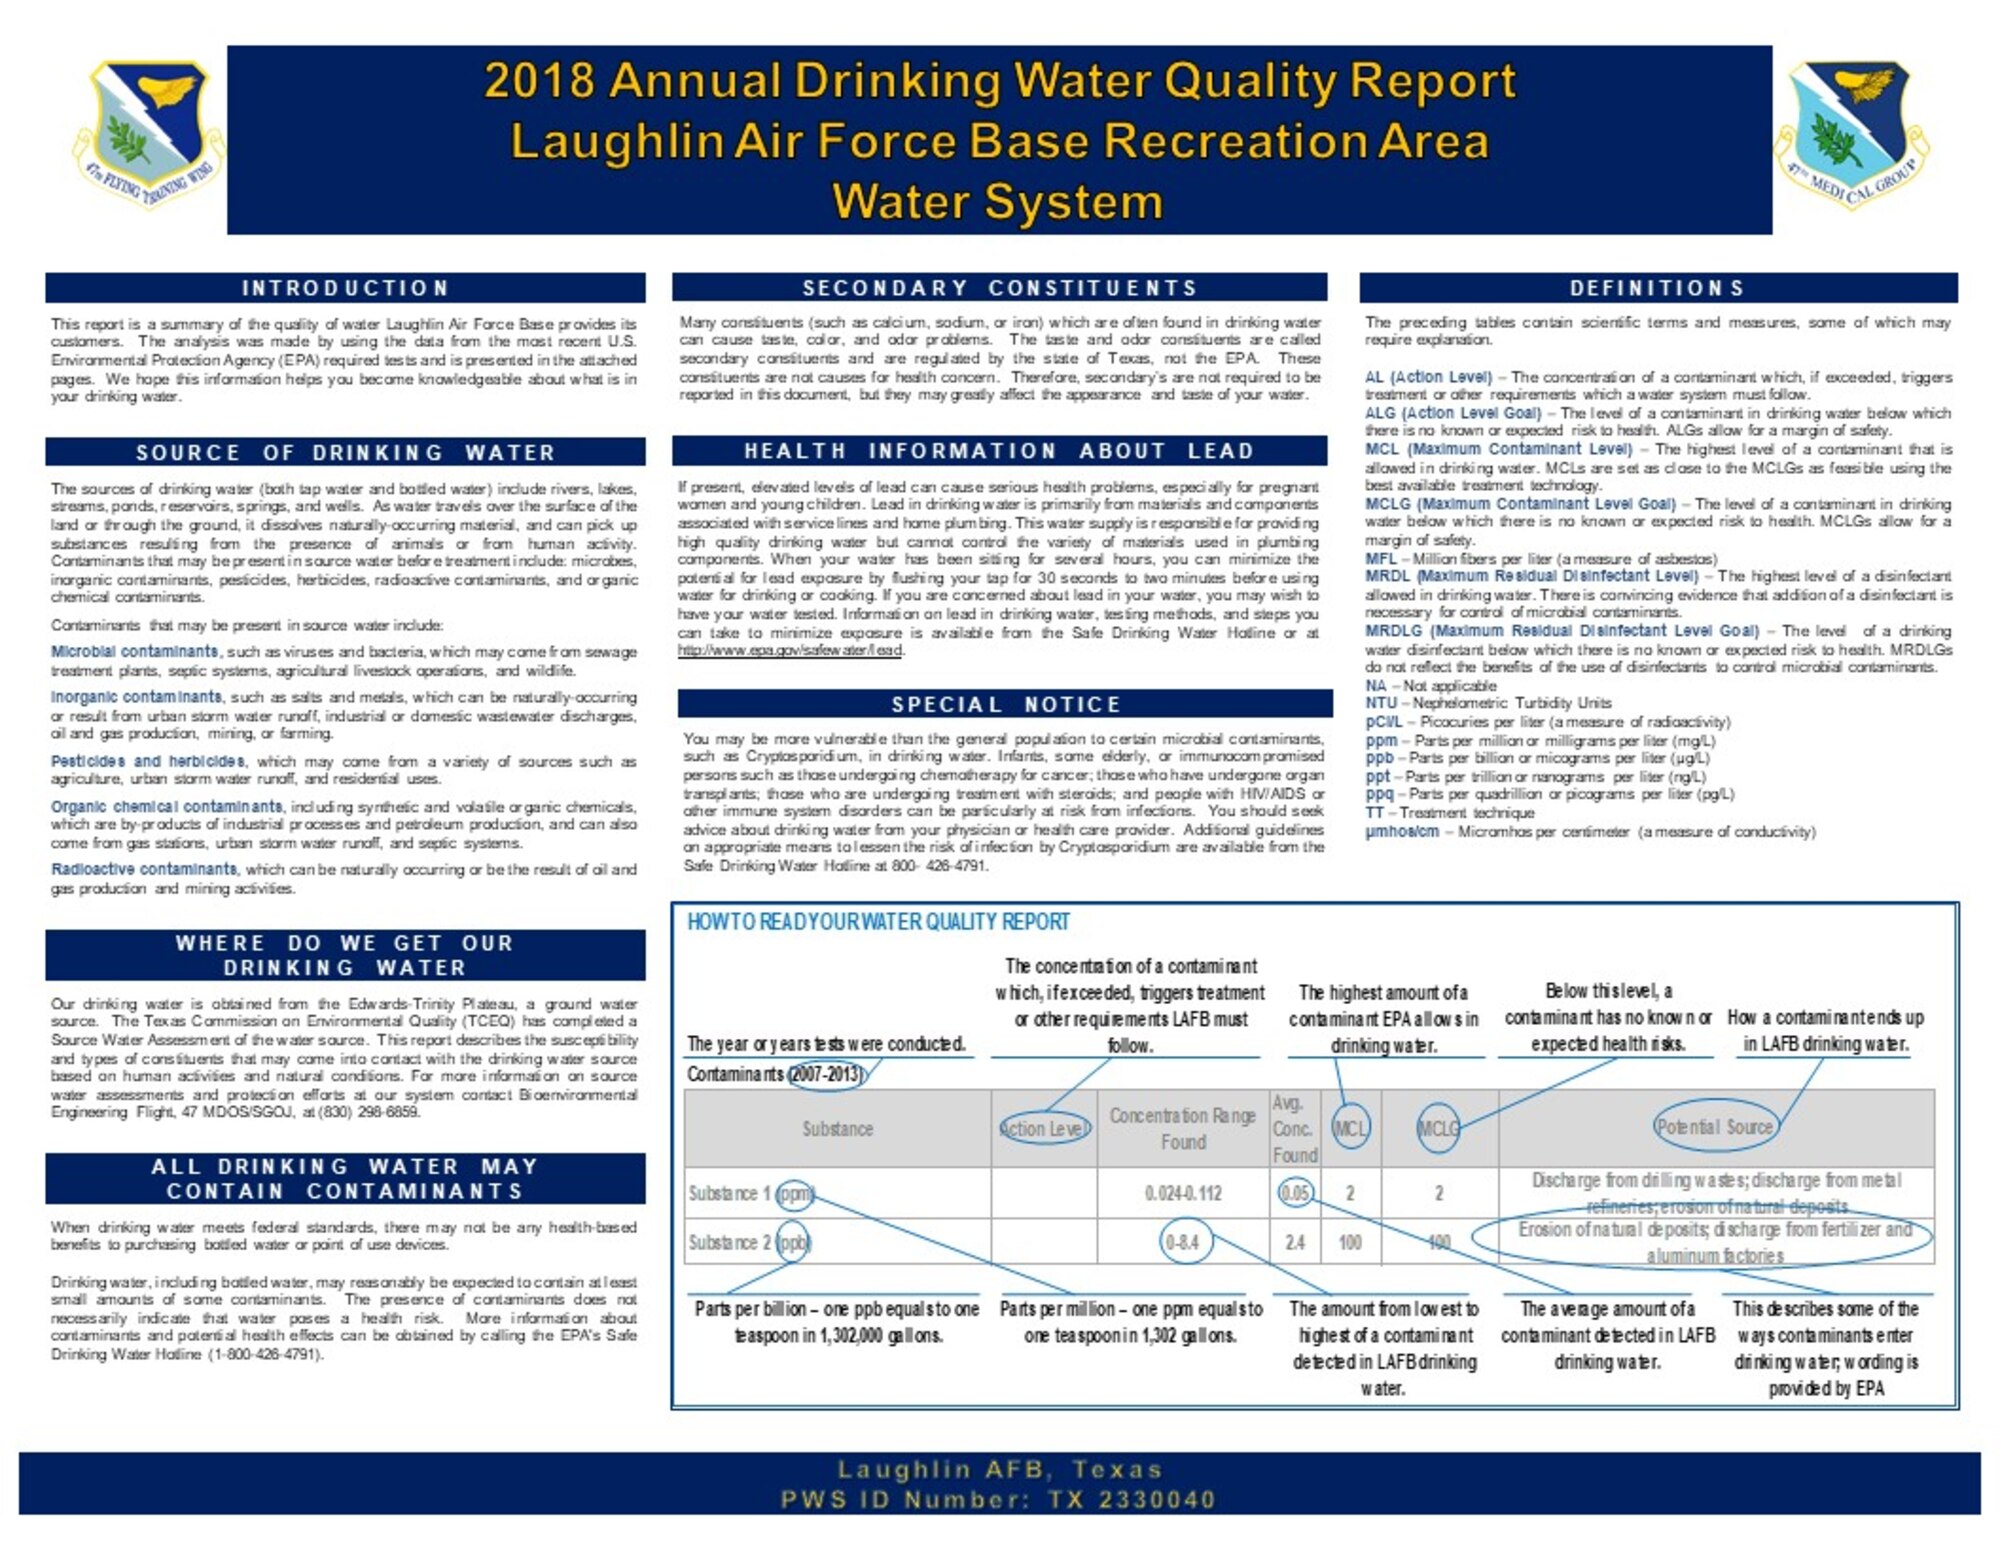 Every year Laughlin AFB is mandated by the State of Texas and the Environmental Protection Agency to publish the annual water sampling results for Laughlin AFB’s and Laughlin AFB Recreation Area’s drinking water. These reports are designed to inform the consumer what is in their drinking water at Laughlin AFB and Laughlin AFB Recreation Area. The two reports can be found on Laughlin AFB’s public website at http://www.laughlin.af.mil/. In summary, the drinking water at Laughlin AFB and Laughlin AFB Recreation Area meet all drinking water requirements set forth by the EPA's Safe Drinking Water Act.